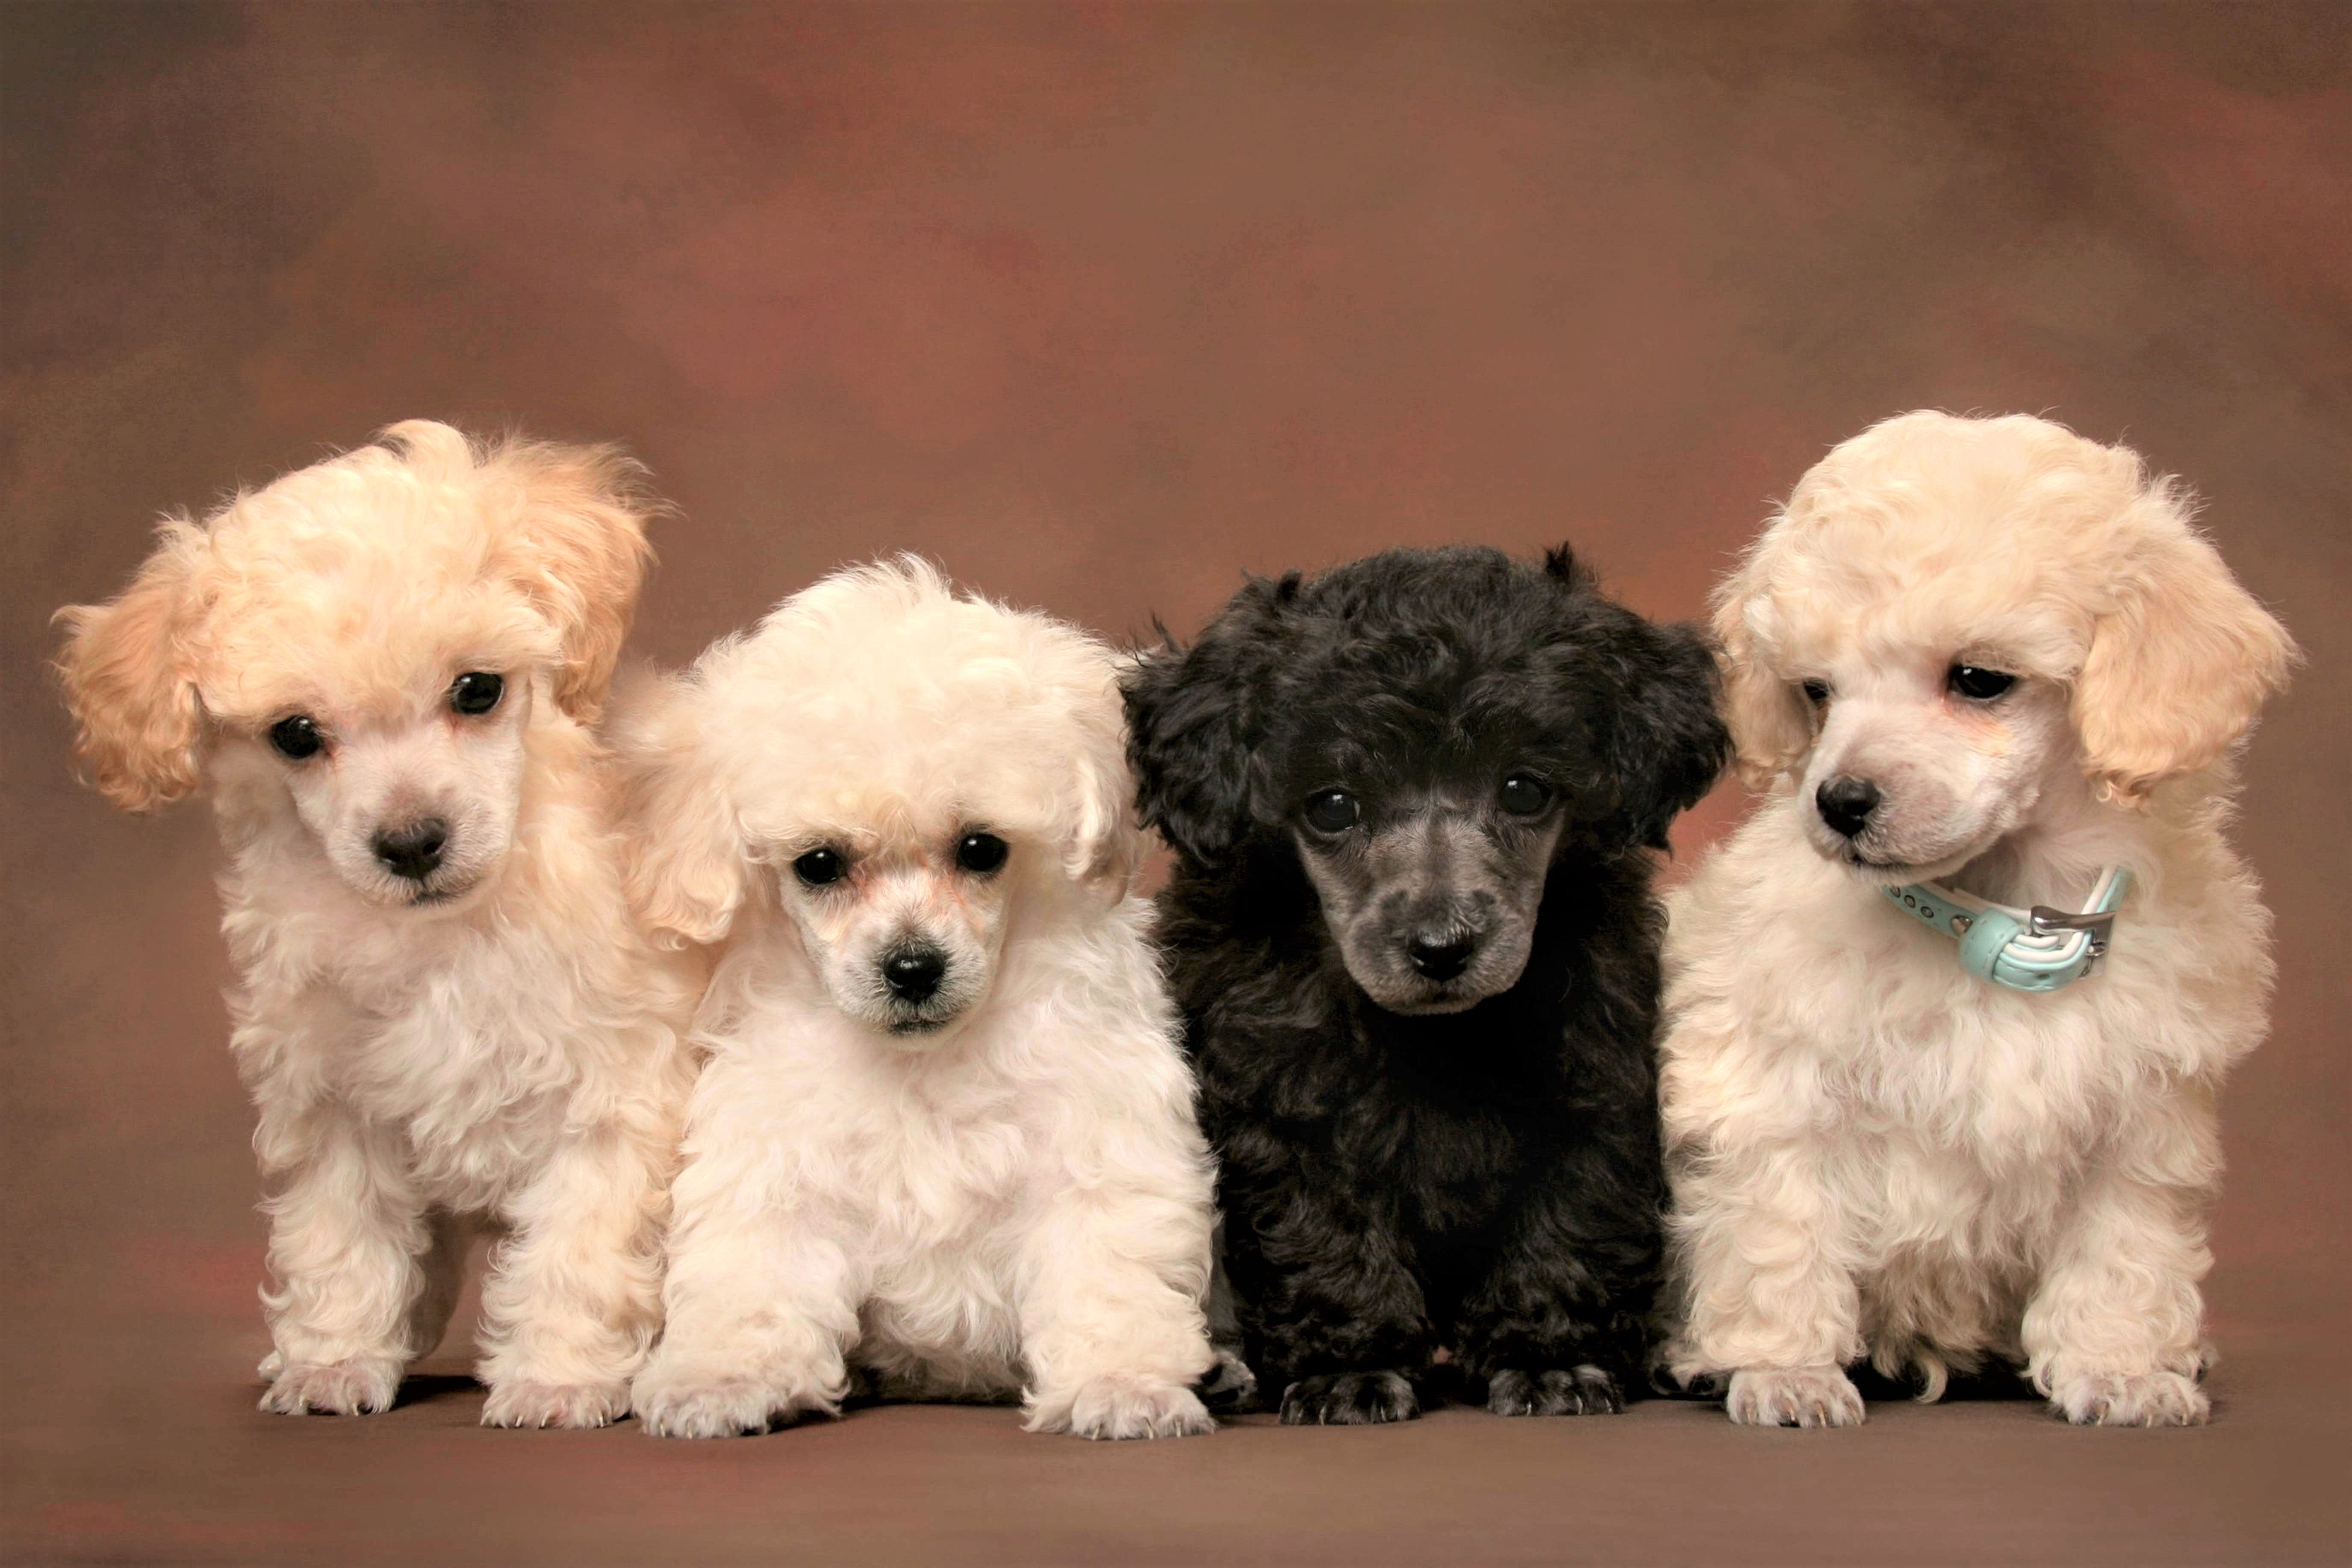 animal, poodle, baby animal, cute, puppy, dogs